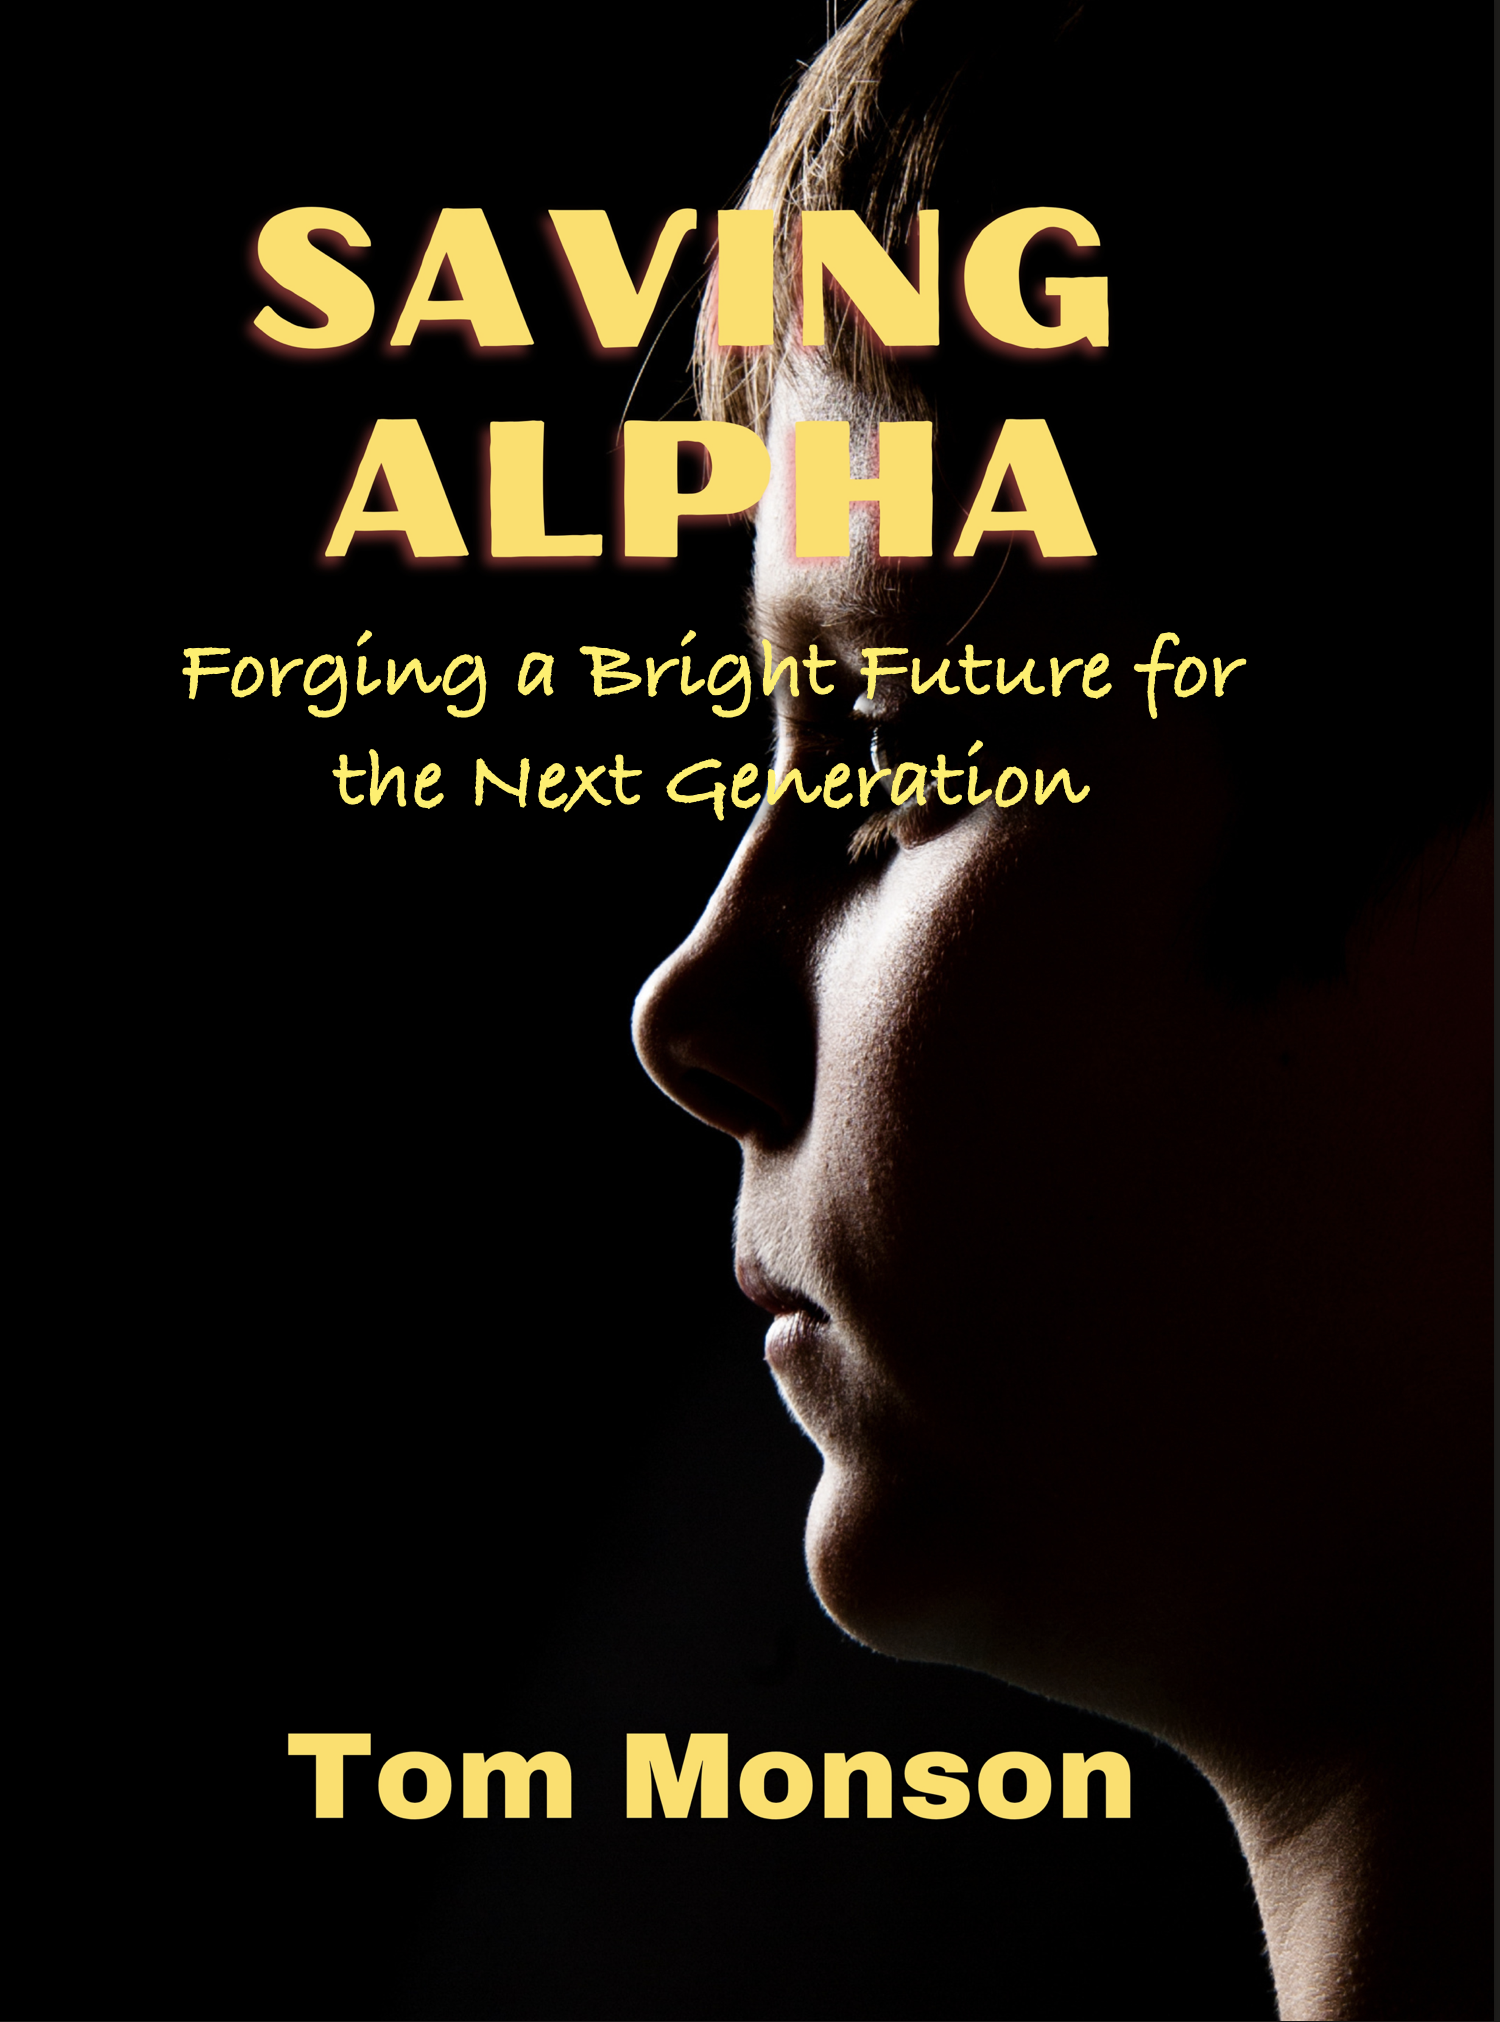 Saving Alpha: Tom Monson presents a transformative perspective on tackling the pressing issue of drug addiction and substance abuse in his latest book, Saving Alpha: Forging a Bright Future for the Next Generation.